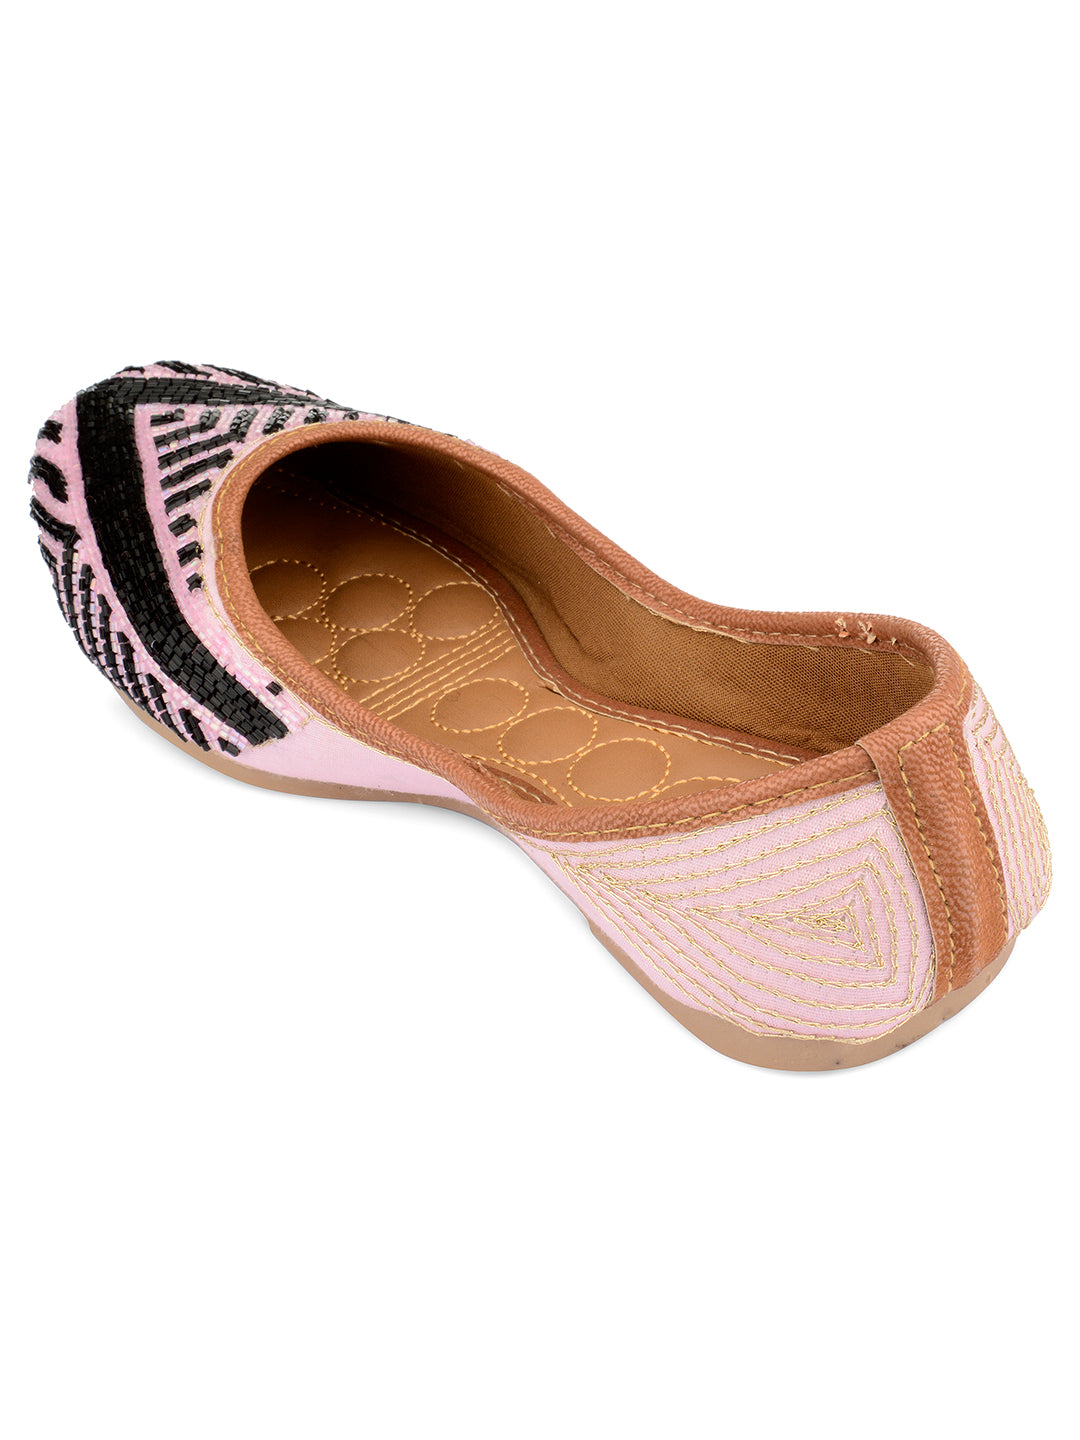 DESI COLOUR Women Pink Printed Leather Ethnic Mojaris with Laser Cuts Flats